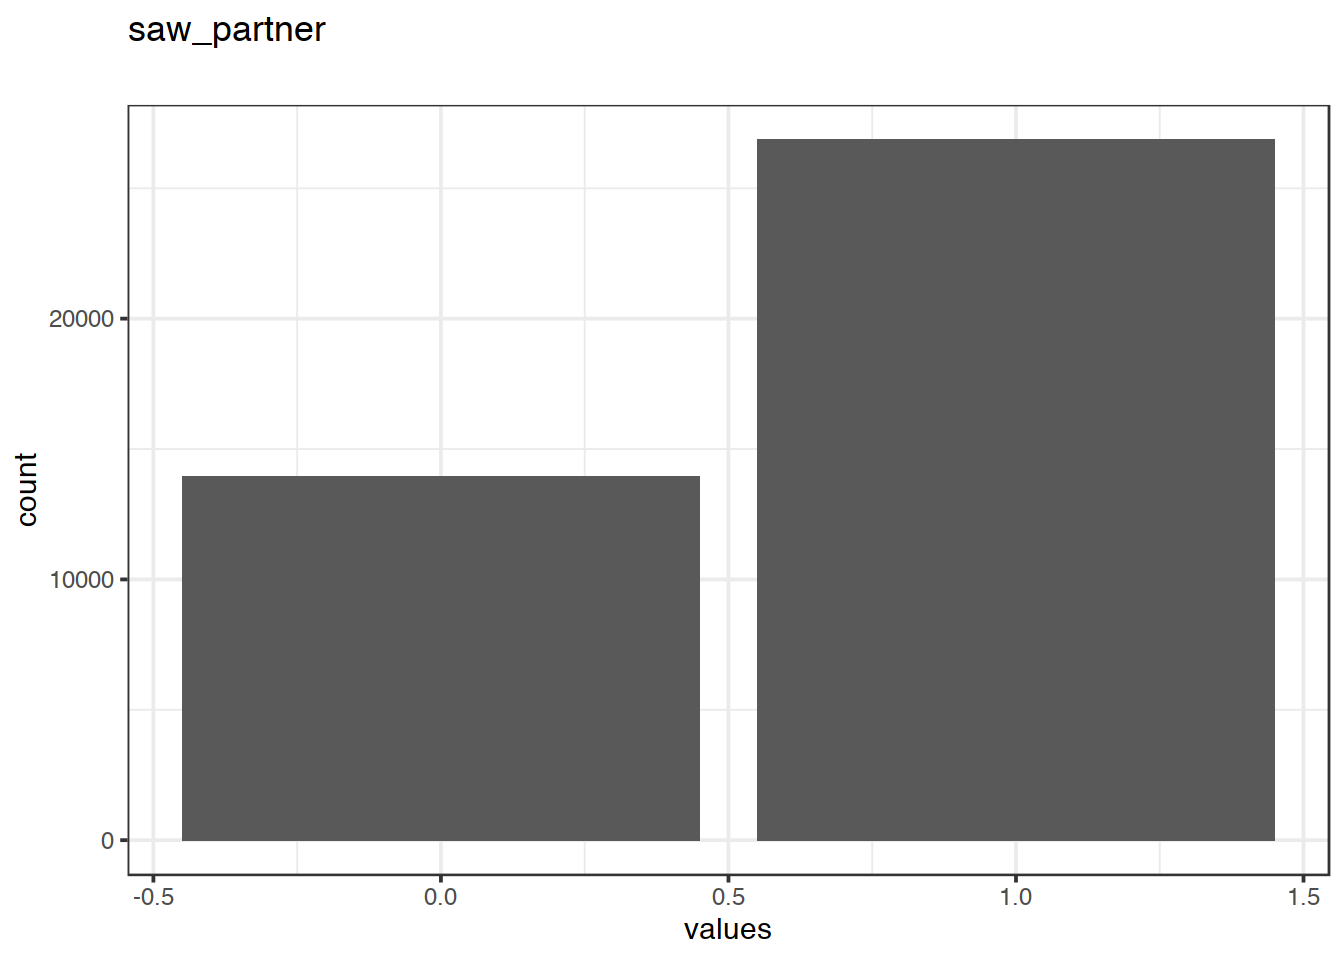 Distribution of values for saw_partner